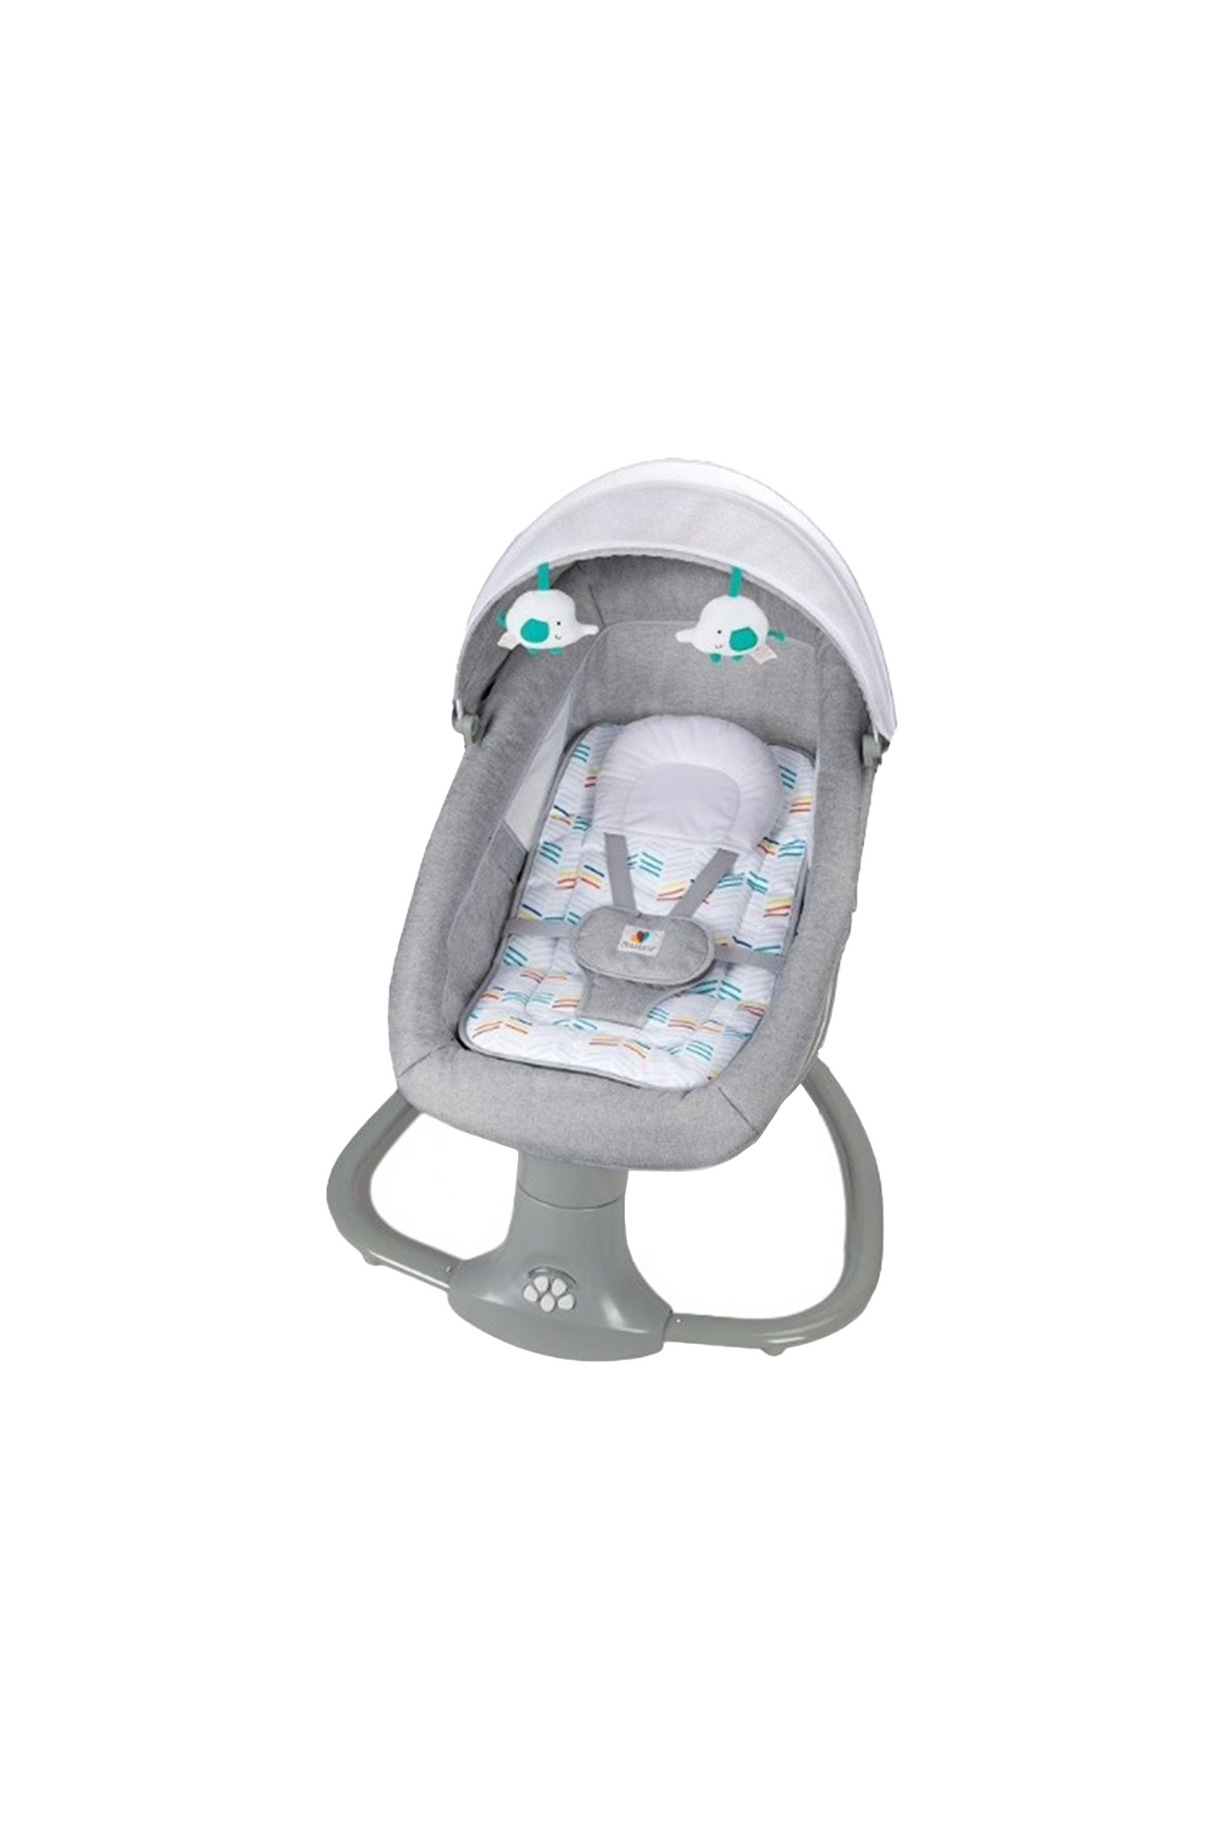 baby electric swing 08105